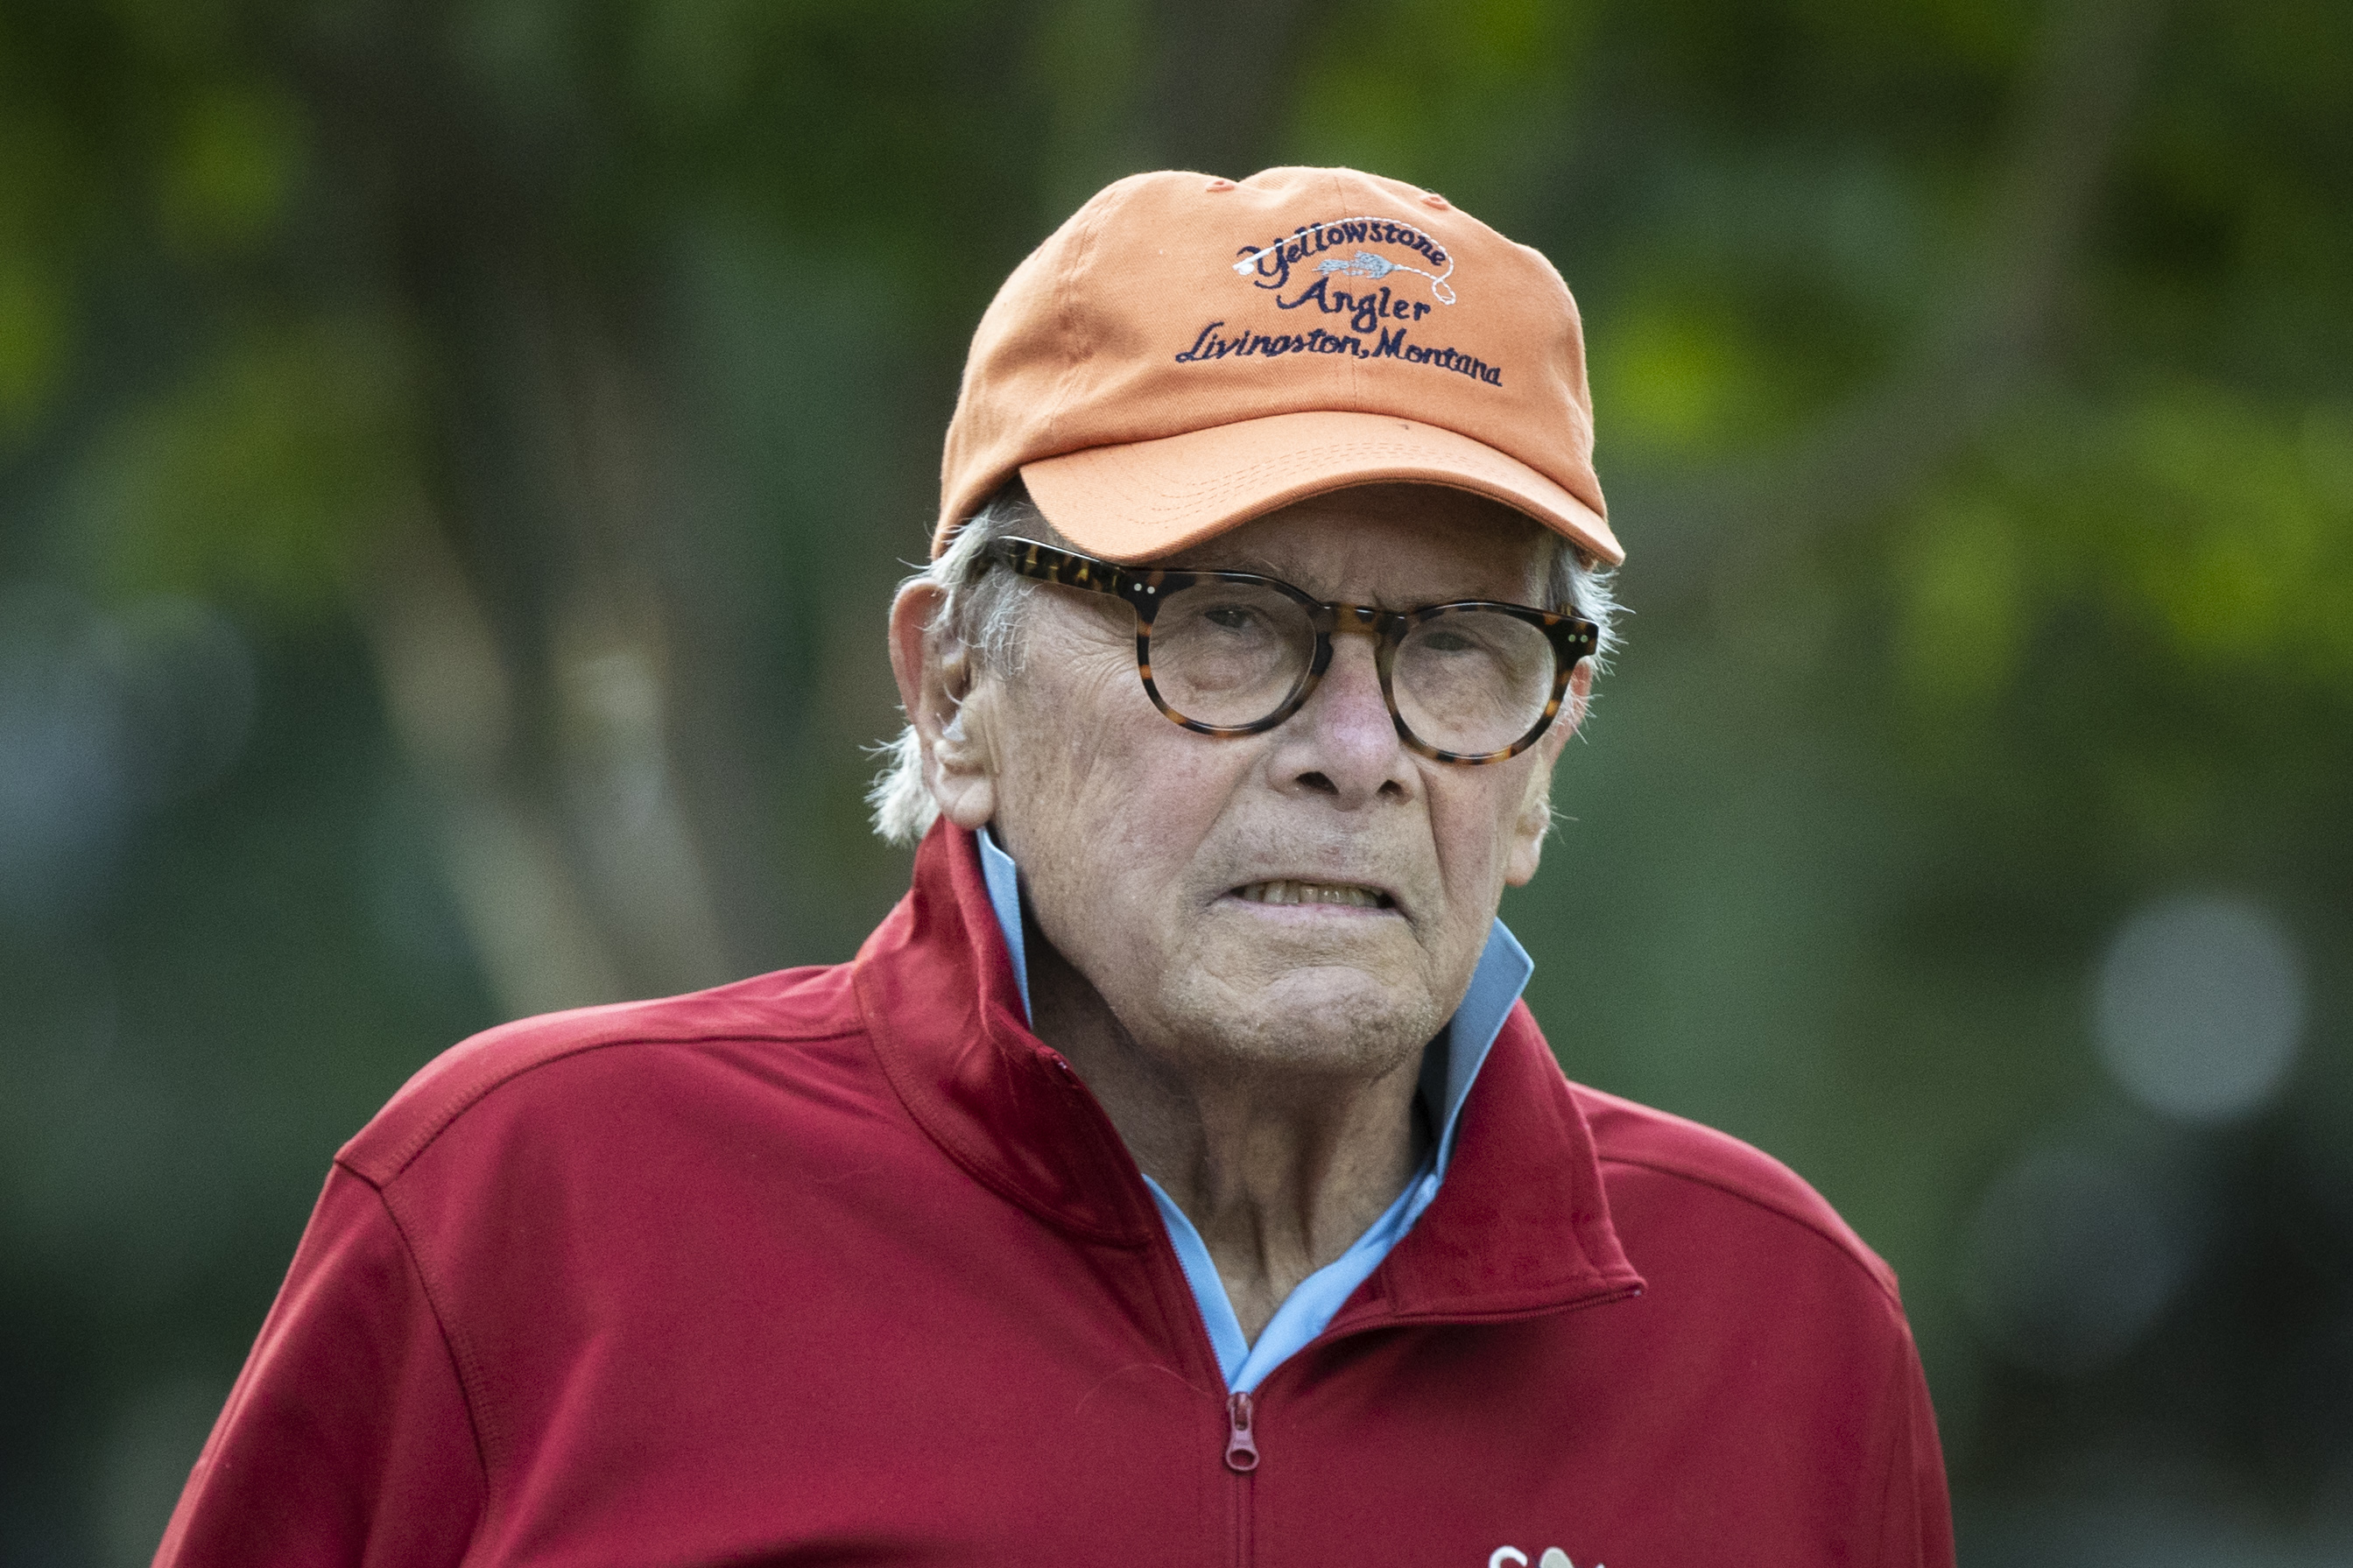 Tom Brokaw at the annual Allen & Company Sun Valley Conference on July 11, 2019, in Sun Valley, Idaho | Source: Getty Images